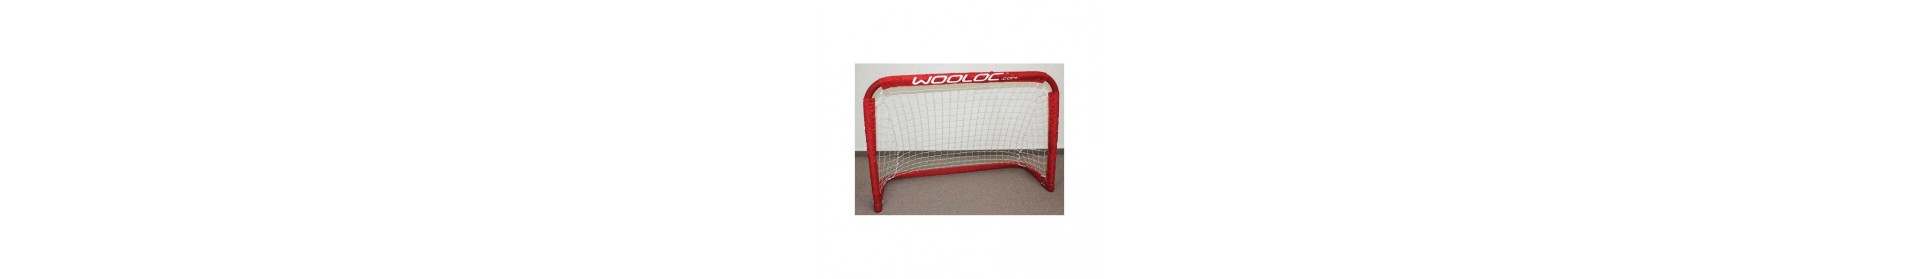 Cages Floorball - Le Vestiaire